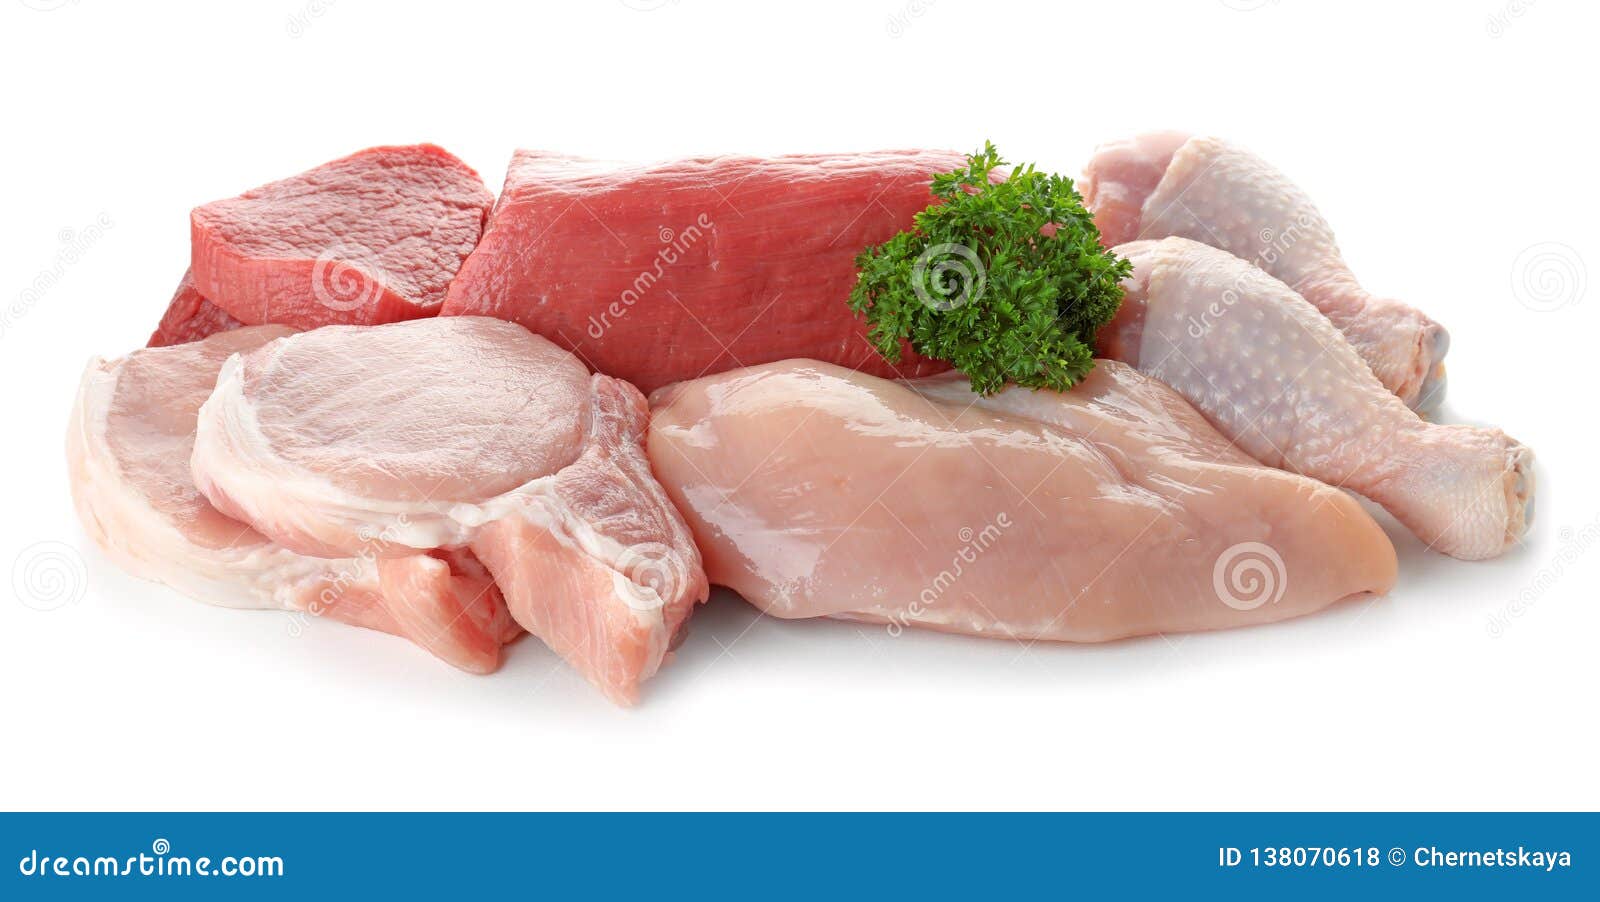 various raw meats with parsley